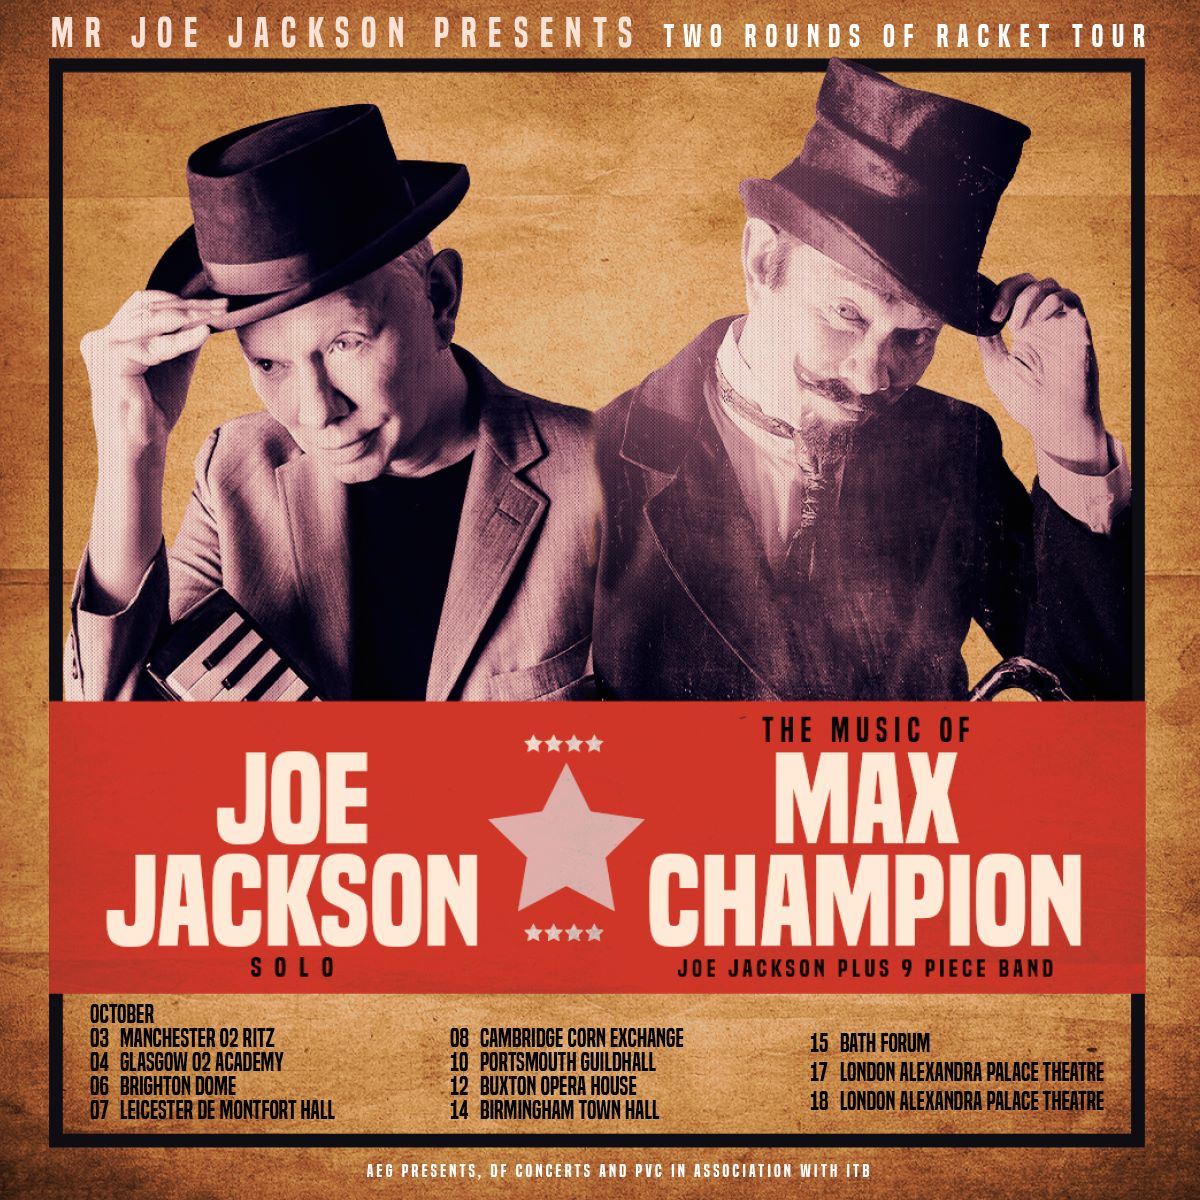 Joe Jackson is bringing 'The Two Round of Racket' tour to the UK in October, featuring a solo set by Joe Jackson and a set inspired by the songs of forgotten Music Hall genius Max Champion. 🎟️Tickets on sale 10:00, Fri 15 Mar >> bit.ly/4a4jivK @joejacksonmusic